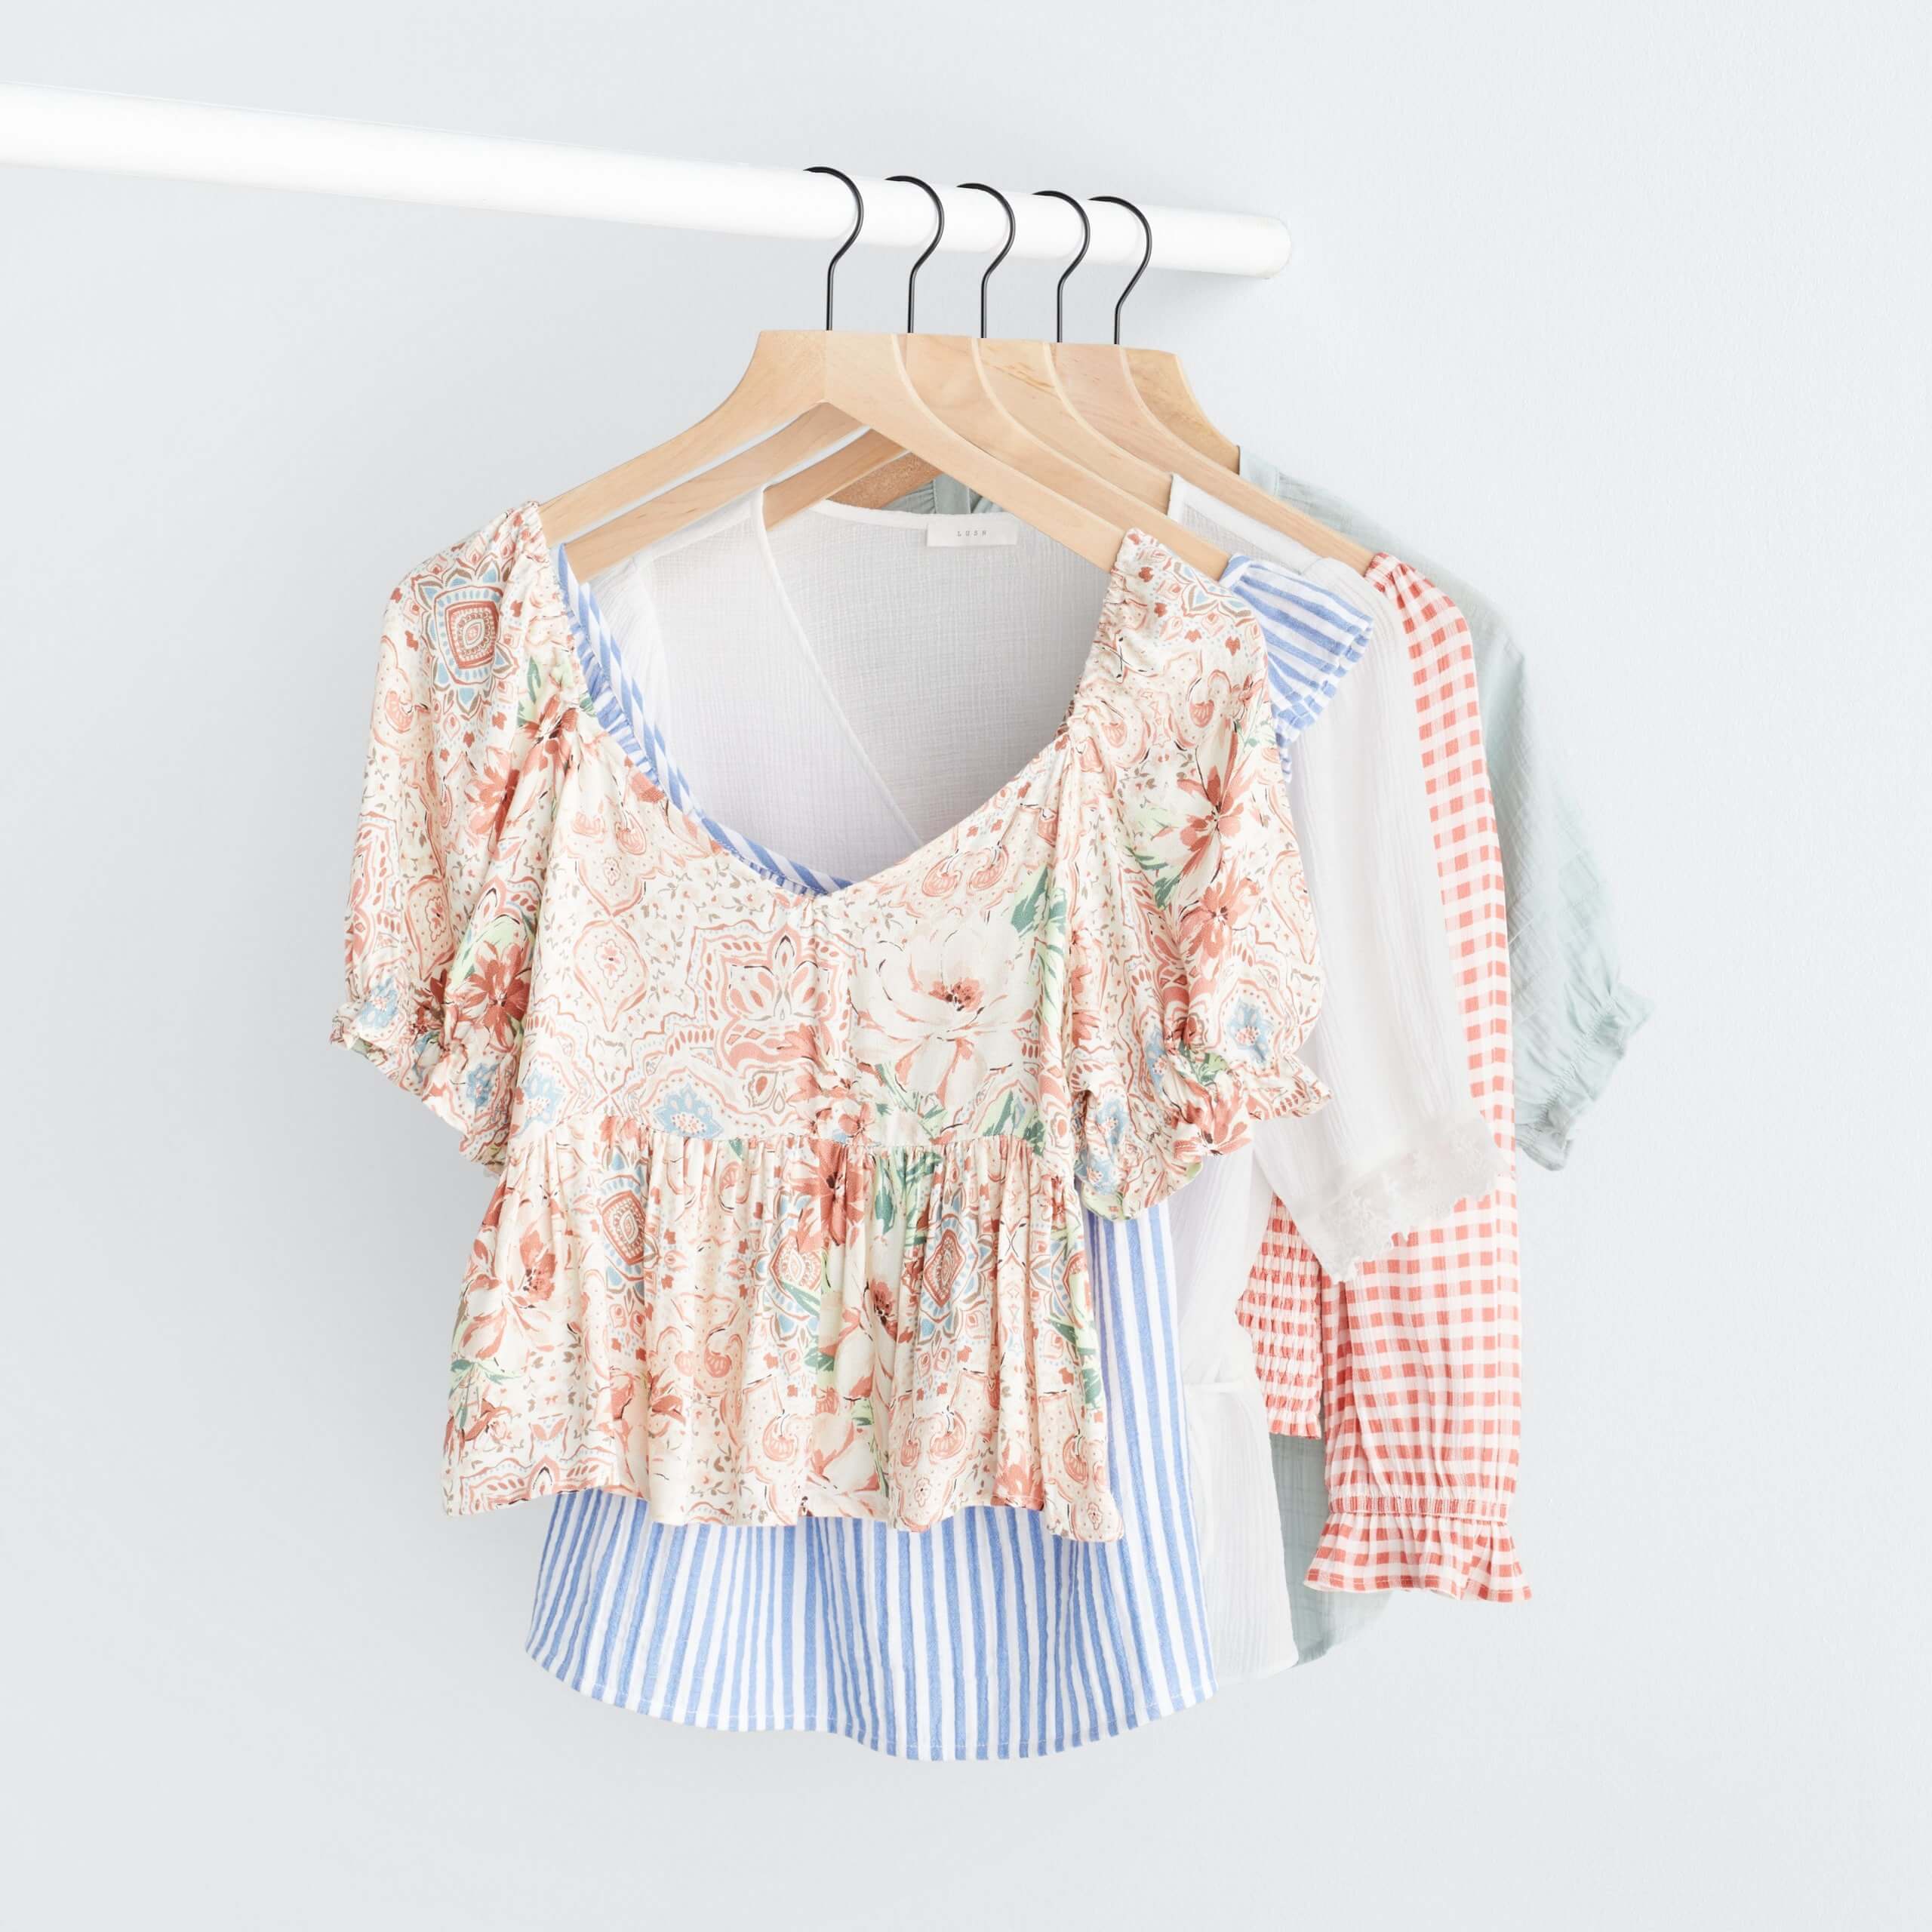 Stitch Fix Women’s rack image with white peplum top with pink florals, blue and white striped ruffle tank, white peplum top, pink and white gingham top and green ruffle sleeve top hanging on white pole.